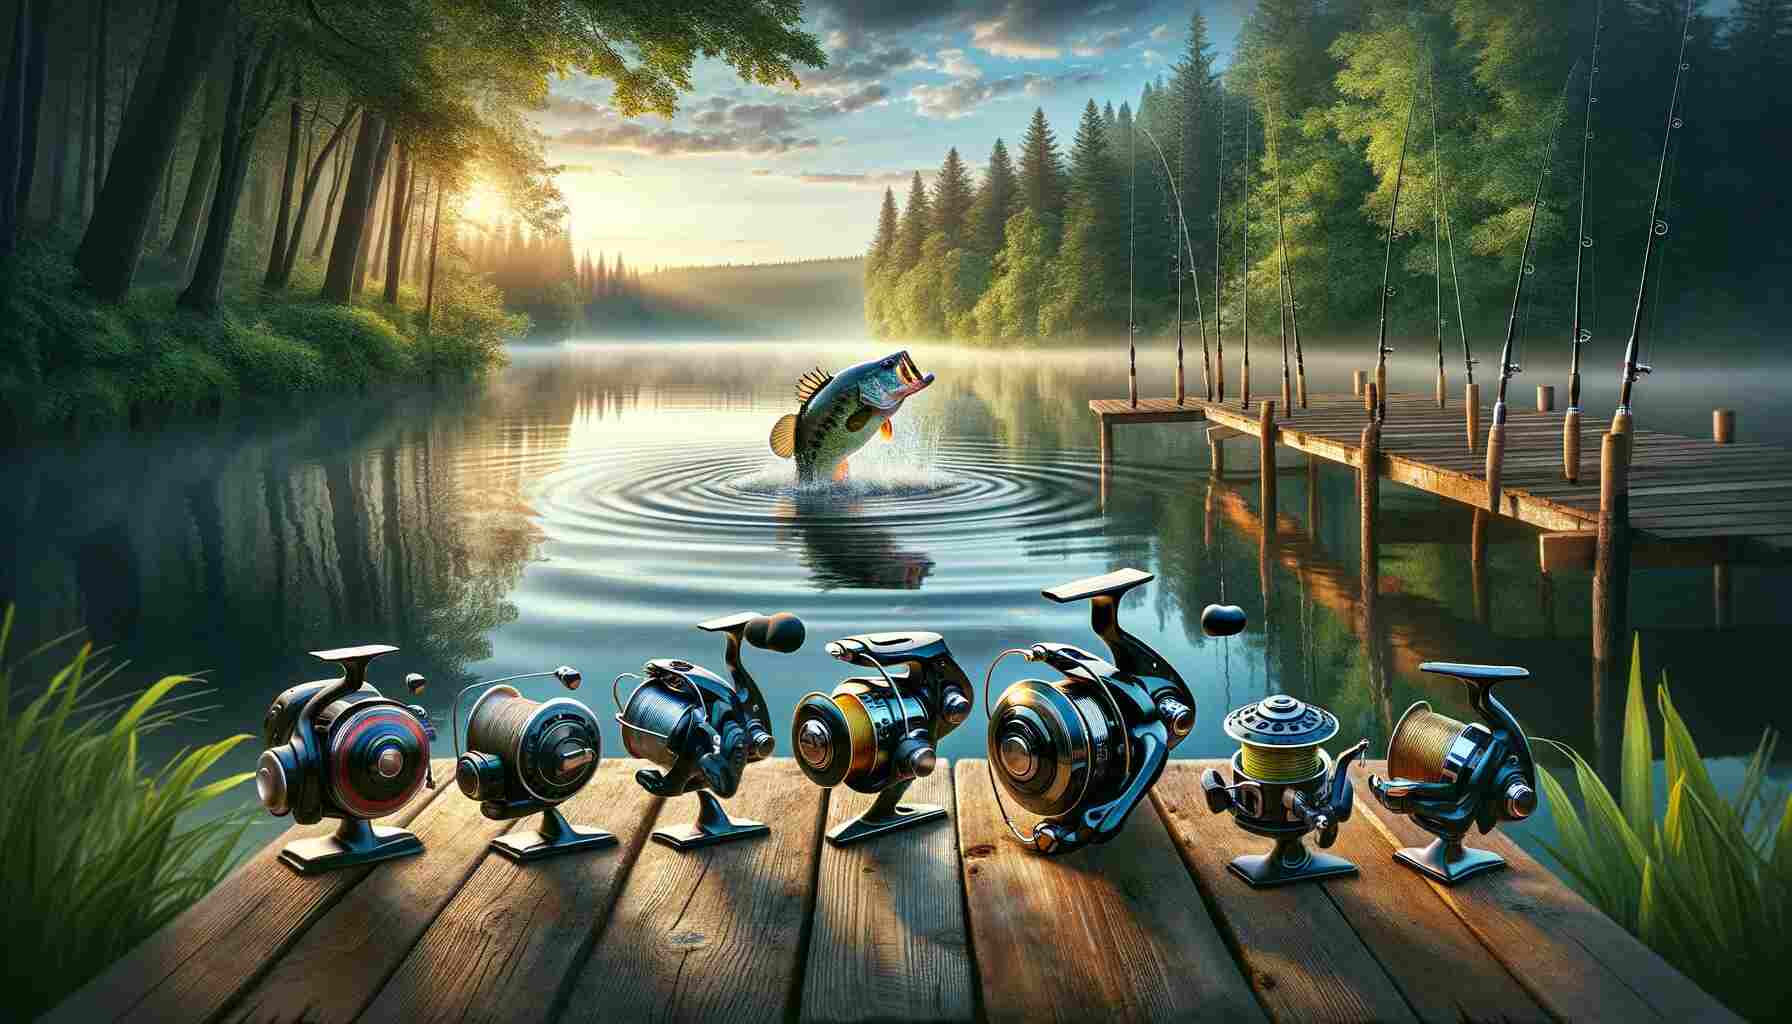 Here is the featured image for "What Size Reel For Bass Fishing Is Best Find the Perfect Size." depicting a serene fishing scene, showcasing various sizes of fishing reels on a wooden dock, with a bass fish jumping out of the water in a calm lake.